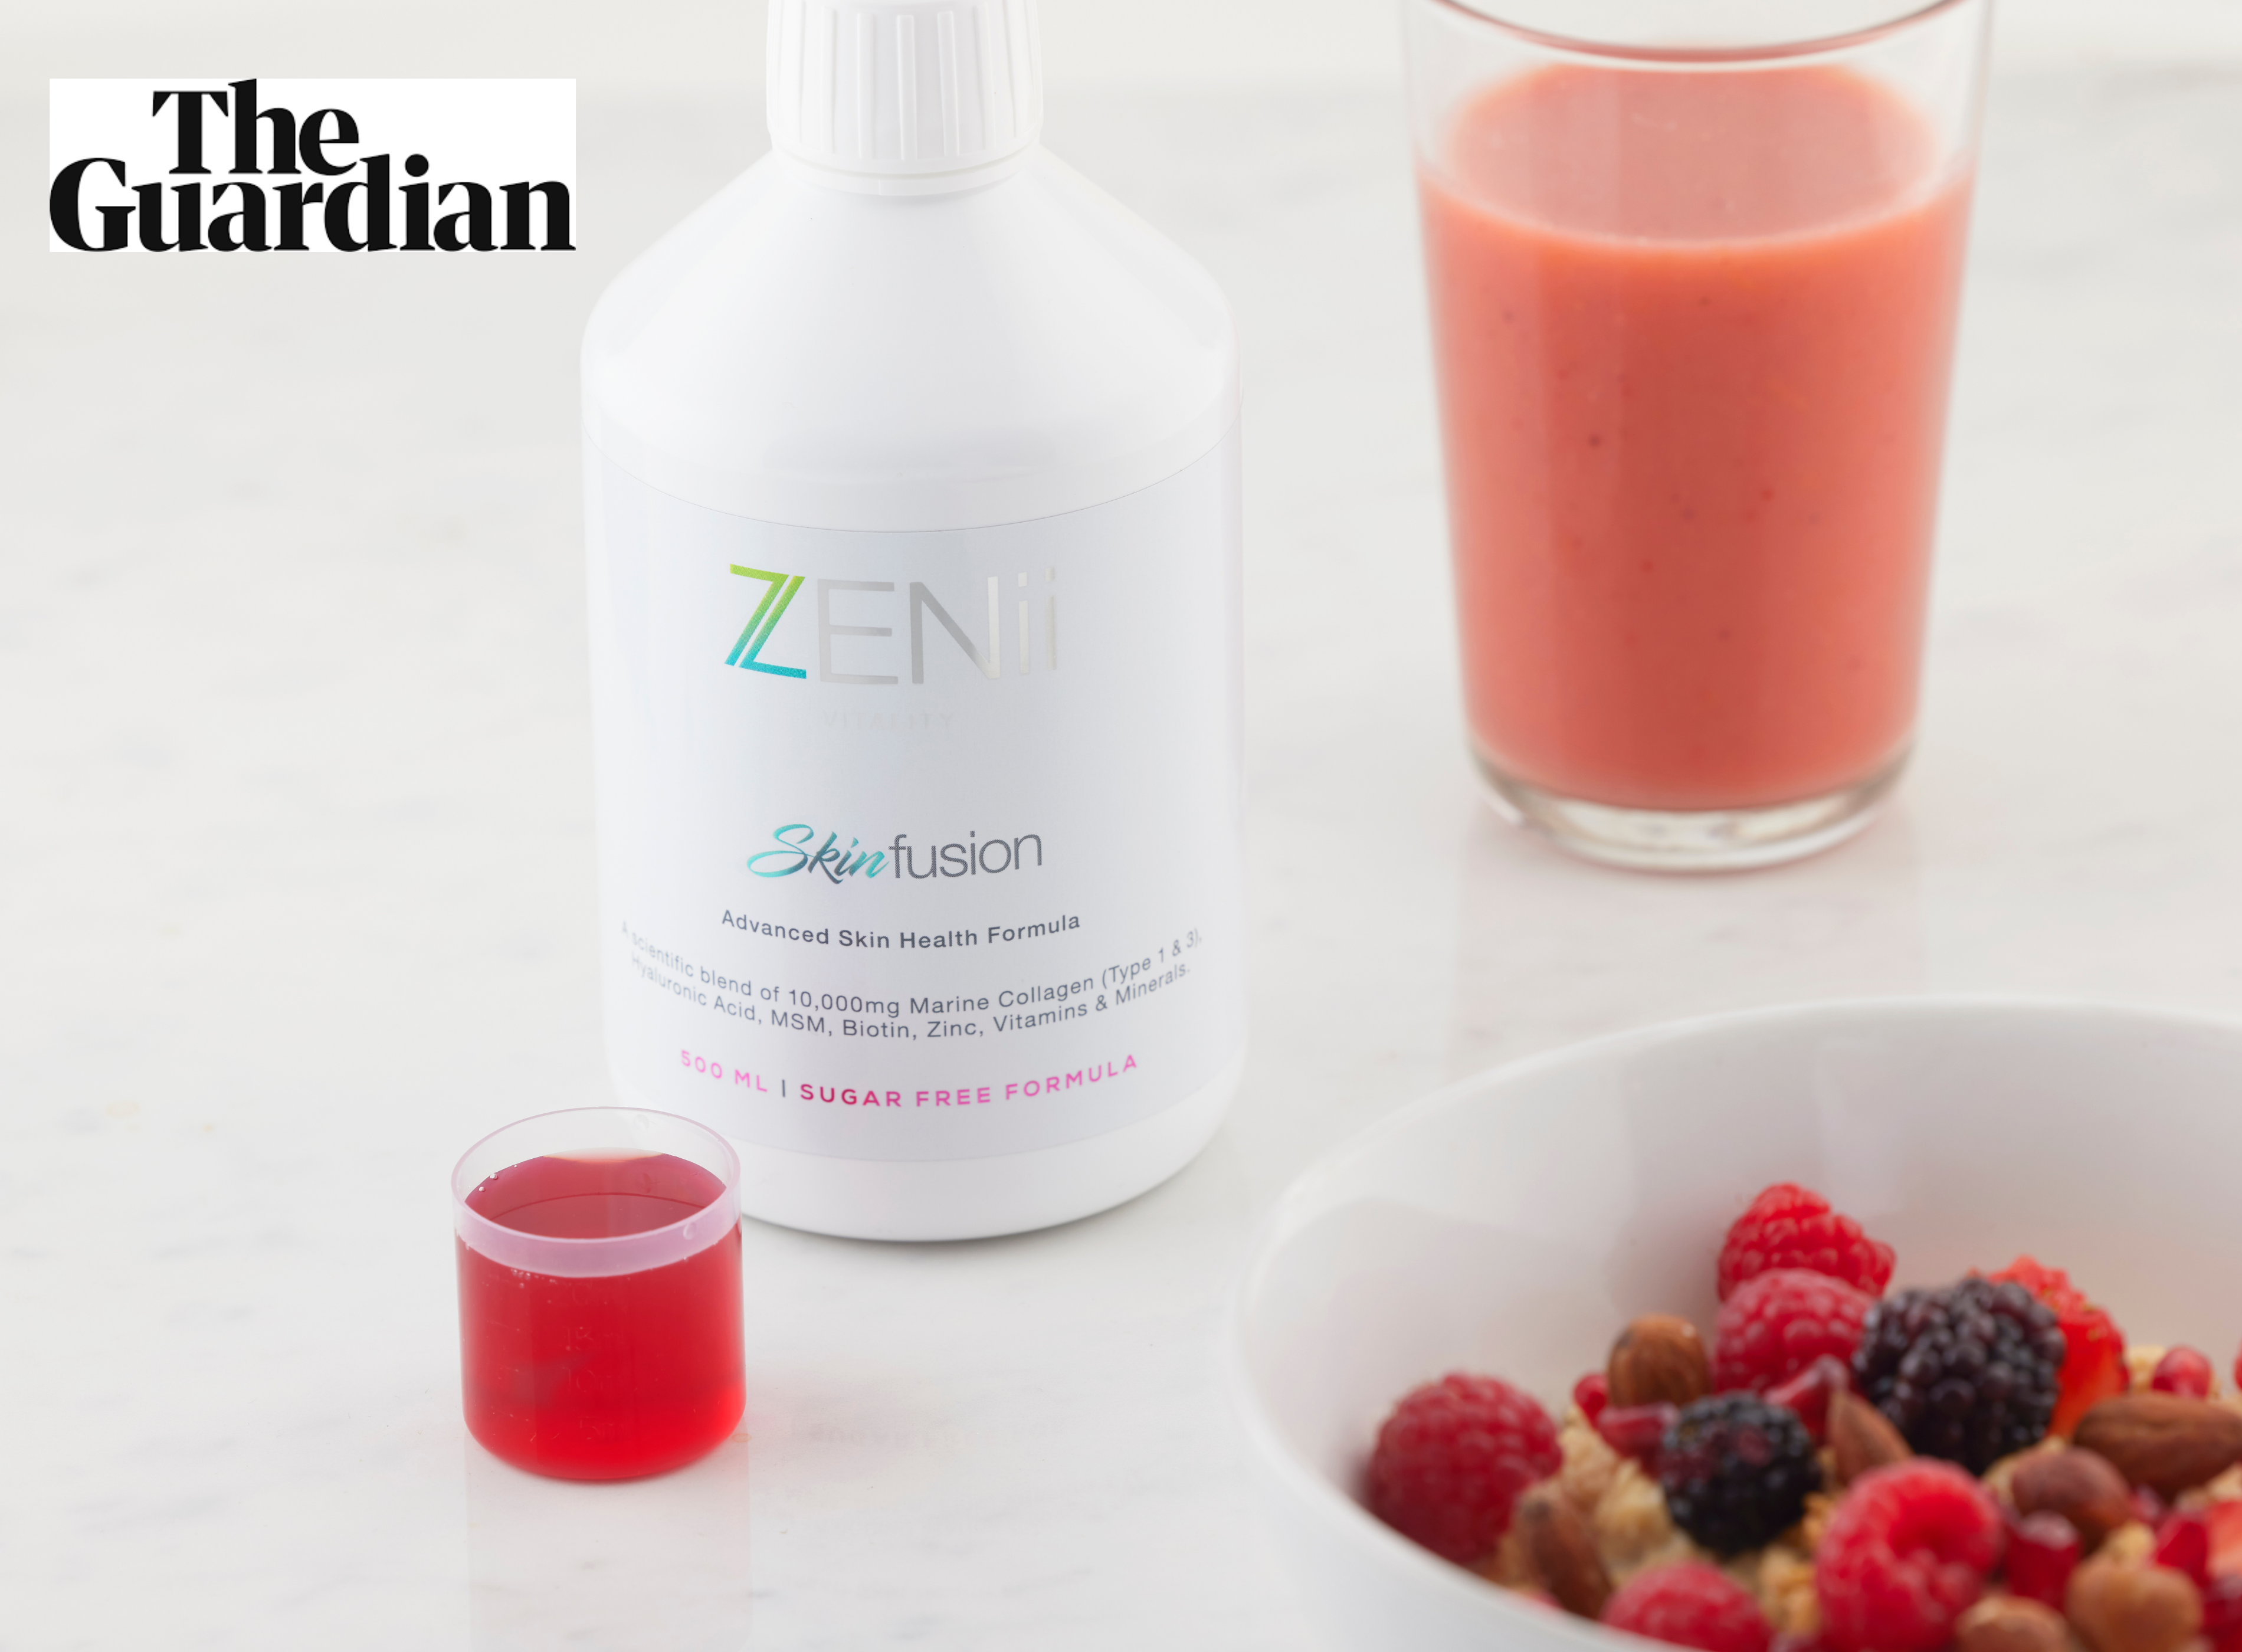 ZENii Fusion - Featured in The Guardian